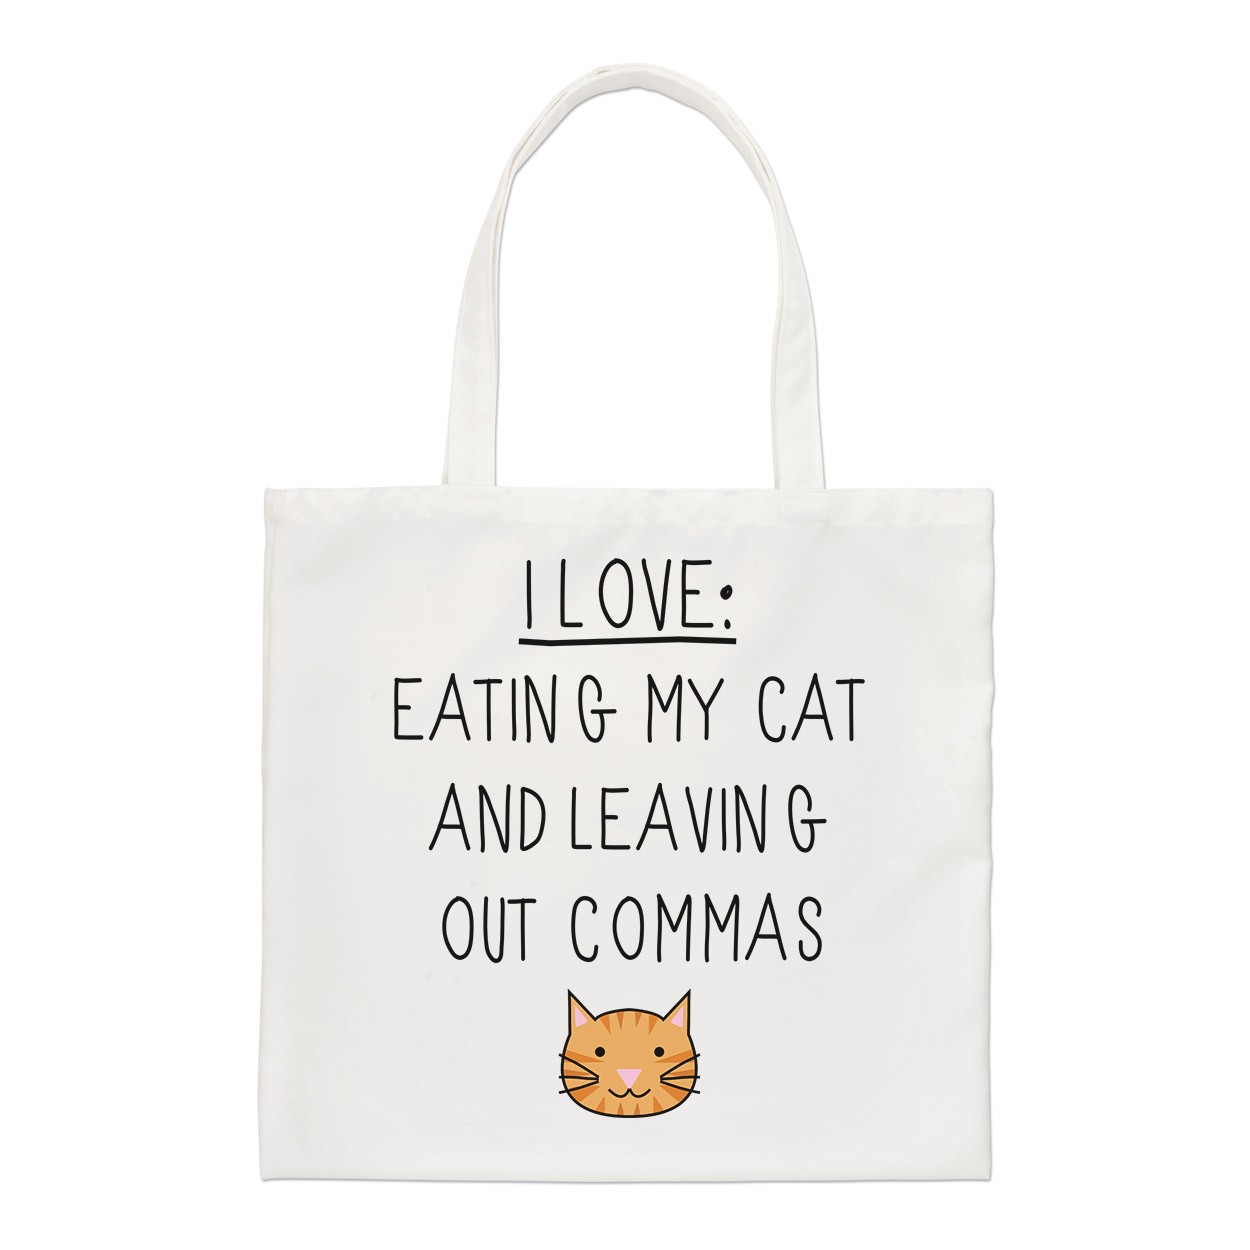 I Love Eating My Cat and Leaving Out Commas Regular Tote Bag